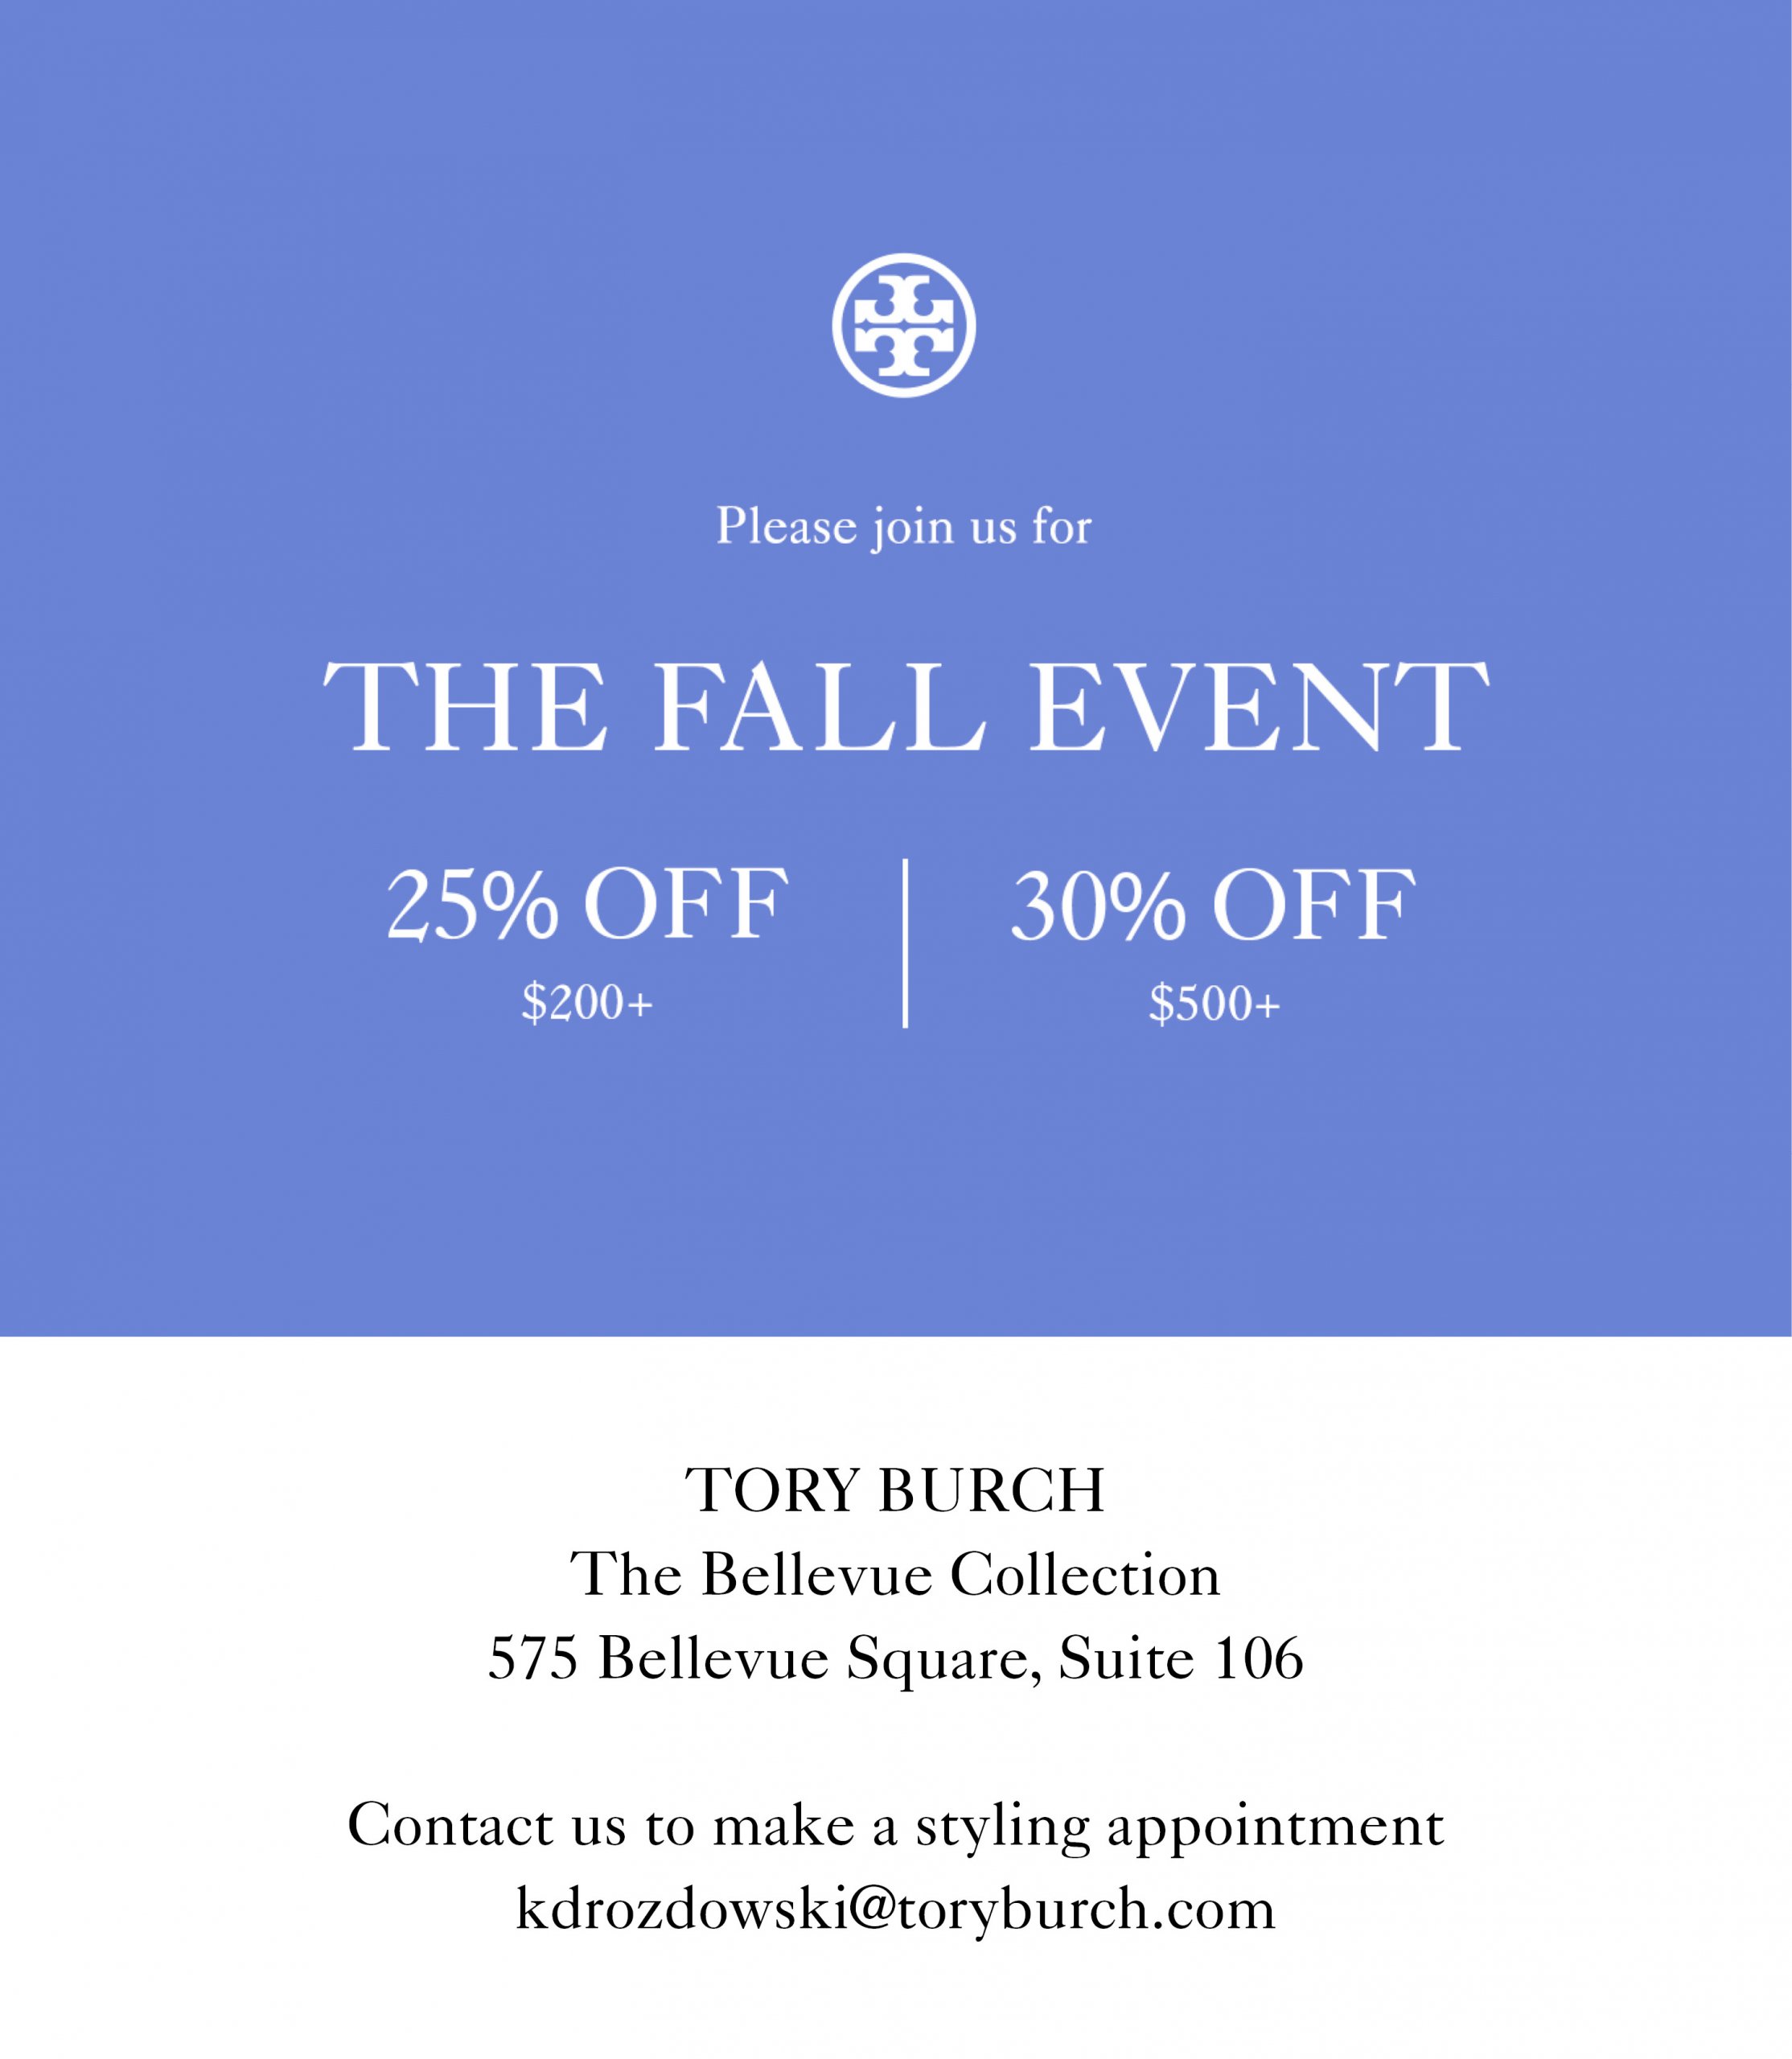 Tory Burch Fall Event - The Bellevue Collection